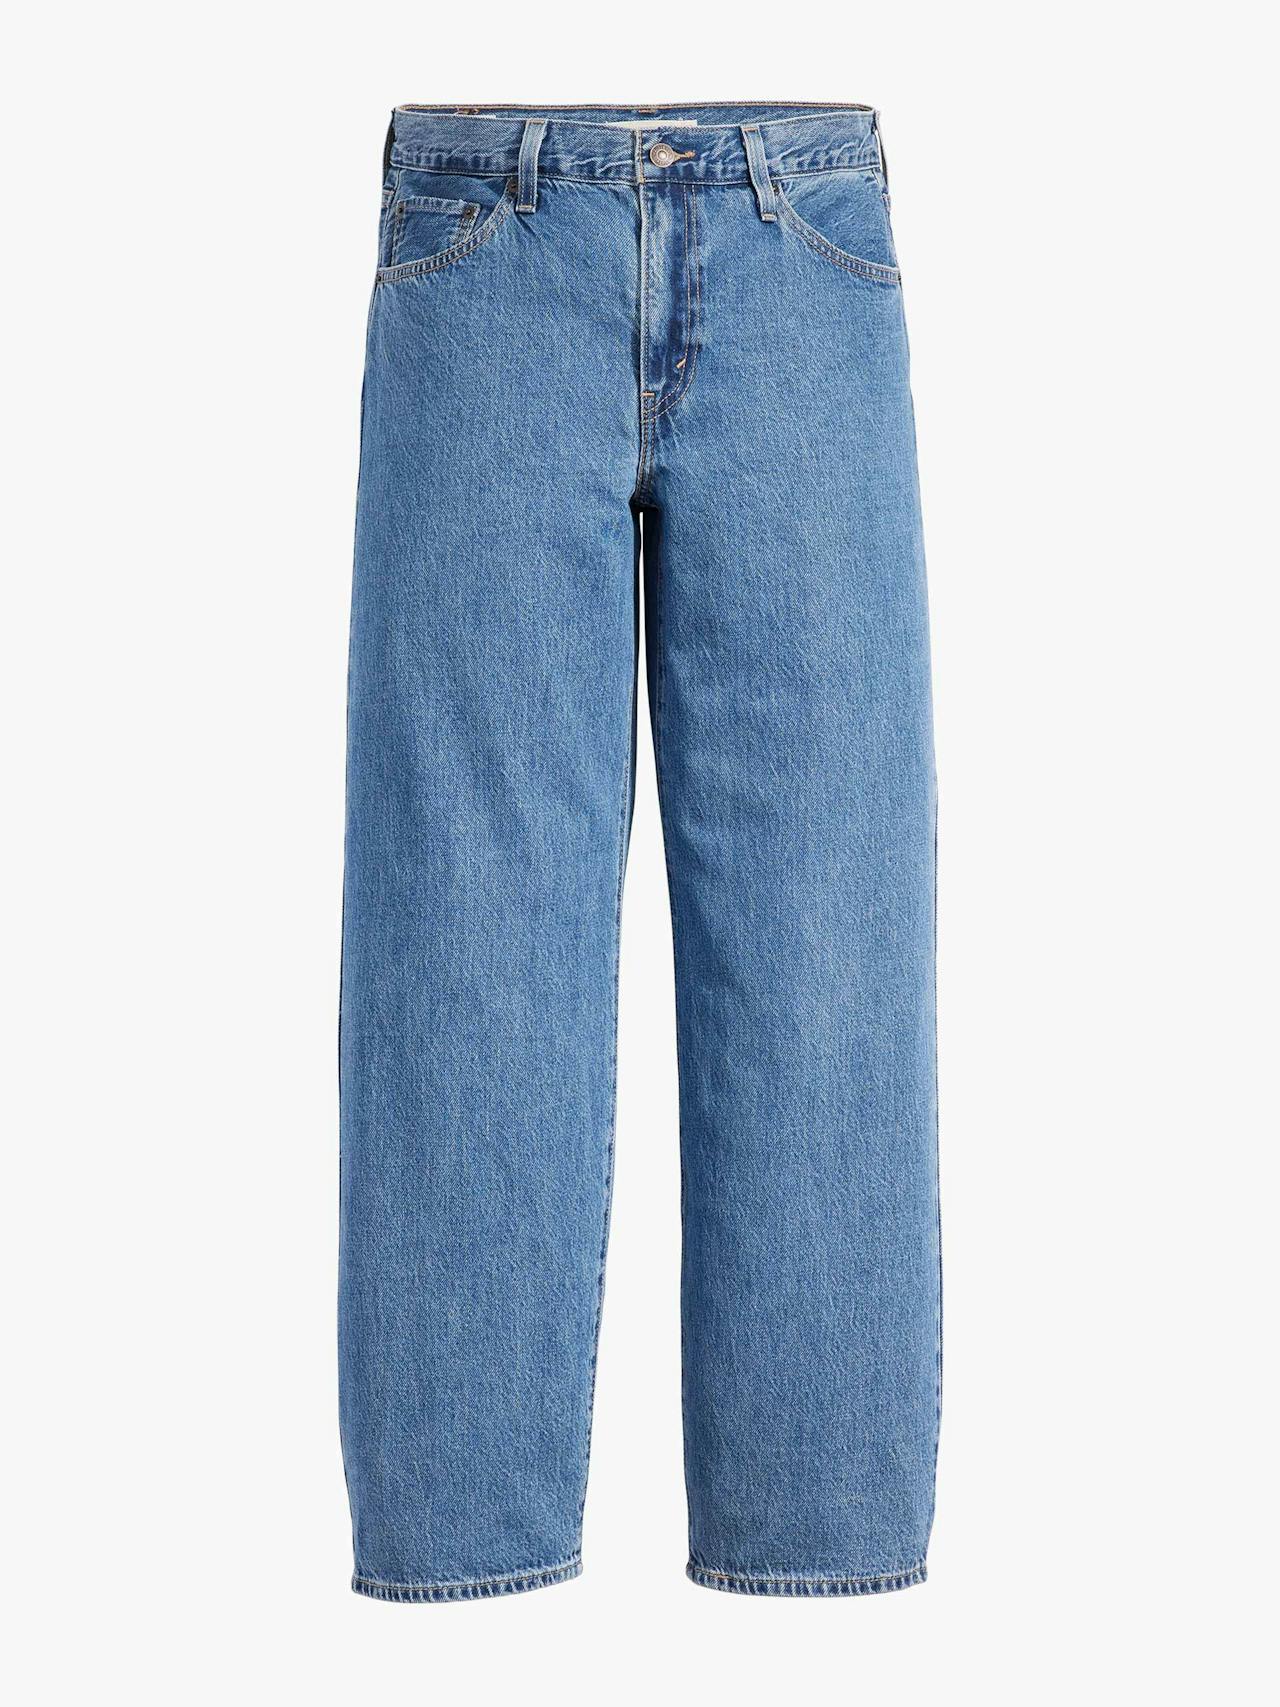 Baggy dad jeans